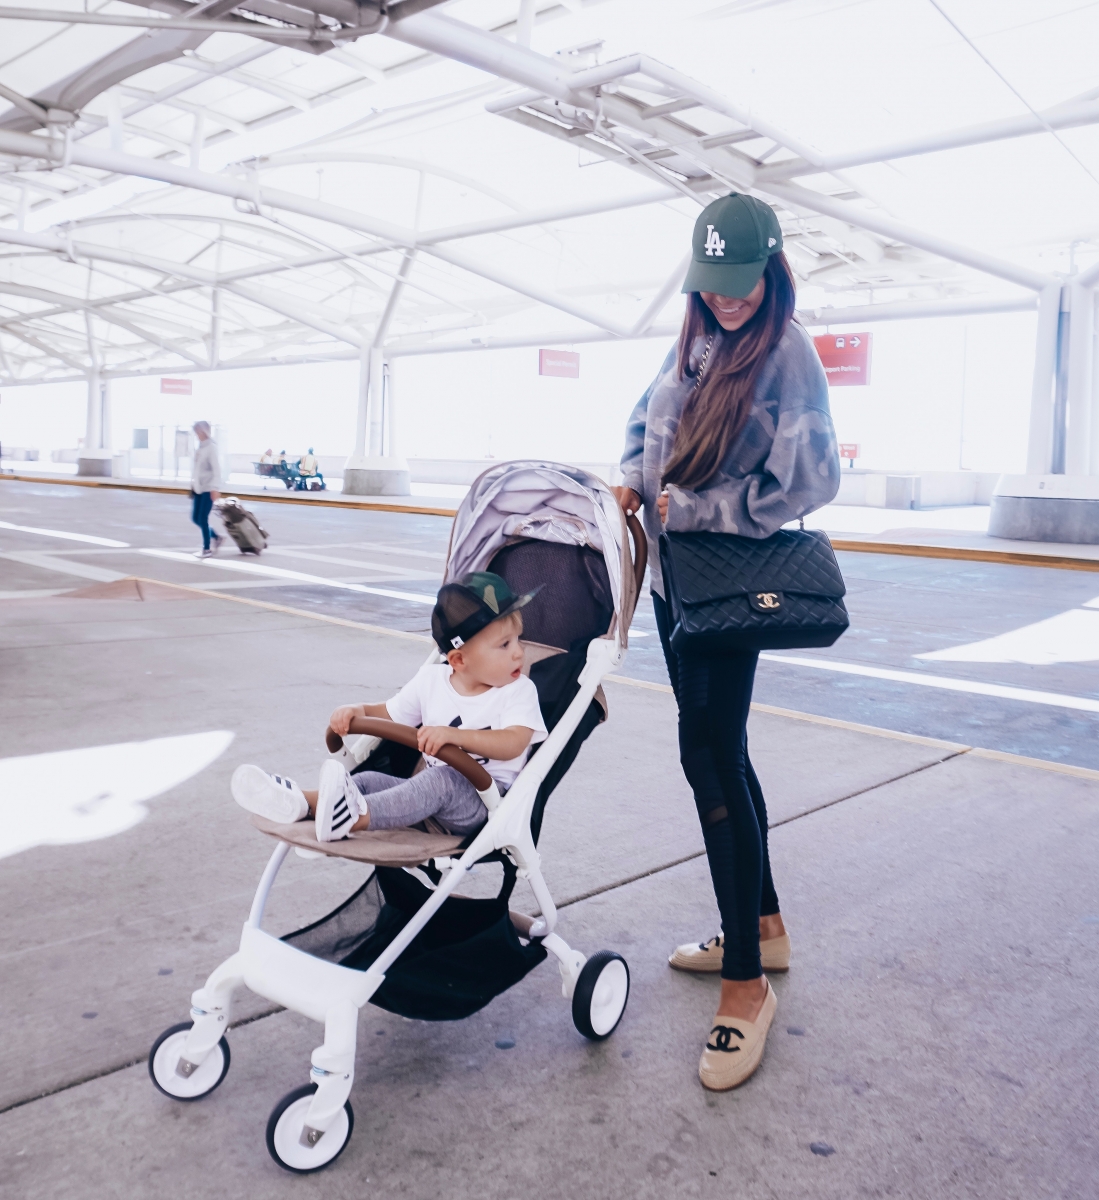 20 Easy To Re-Create Cute Travel Outfits featured by top US fashion and travel blogger, Emily Gemma of The Sweetest Thing: pinterest cute airport travel fashion outfit fall 2018, emily gemma travel style, stylish cute casual travel outfit idea 2018, travel stroller baby sing amazon, camo sweatshirt leggings travel outfit